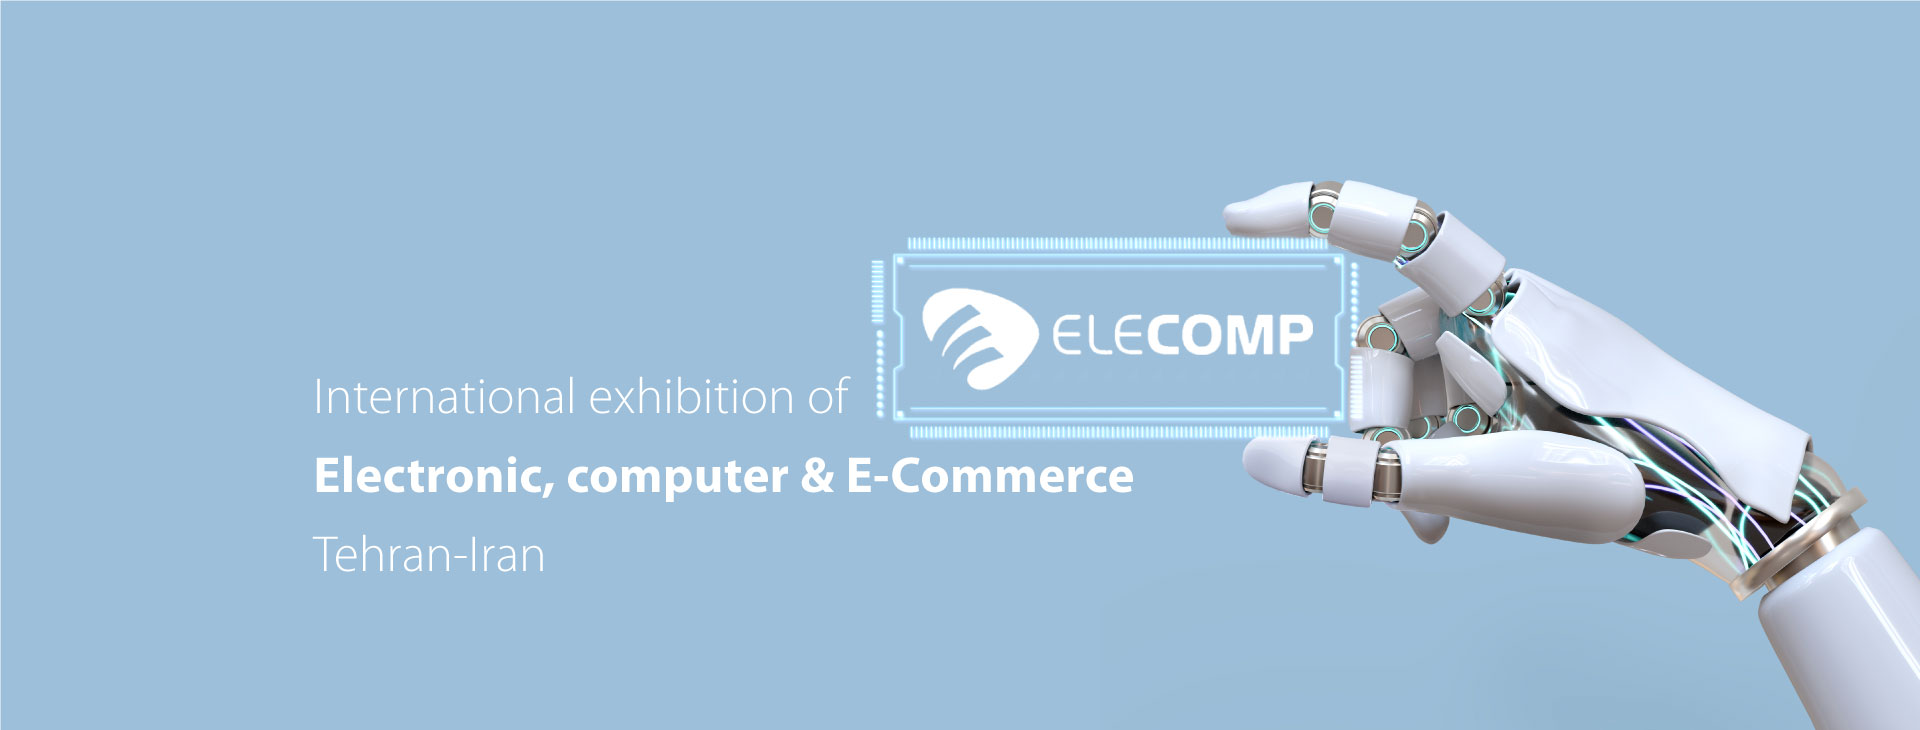 International exhibition of Electronic, computer and E-commerce